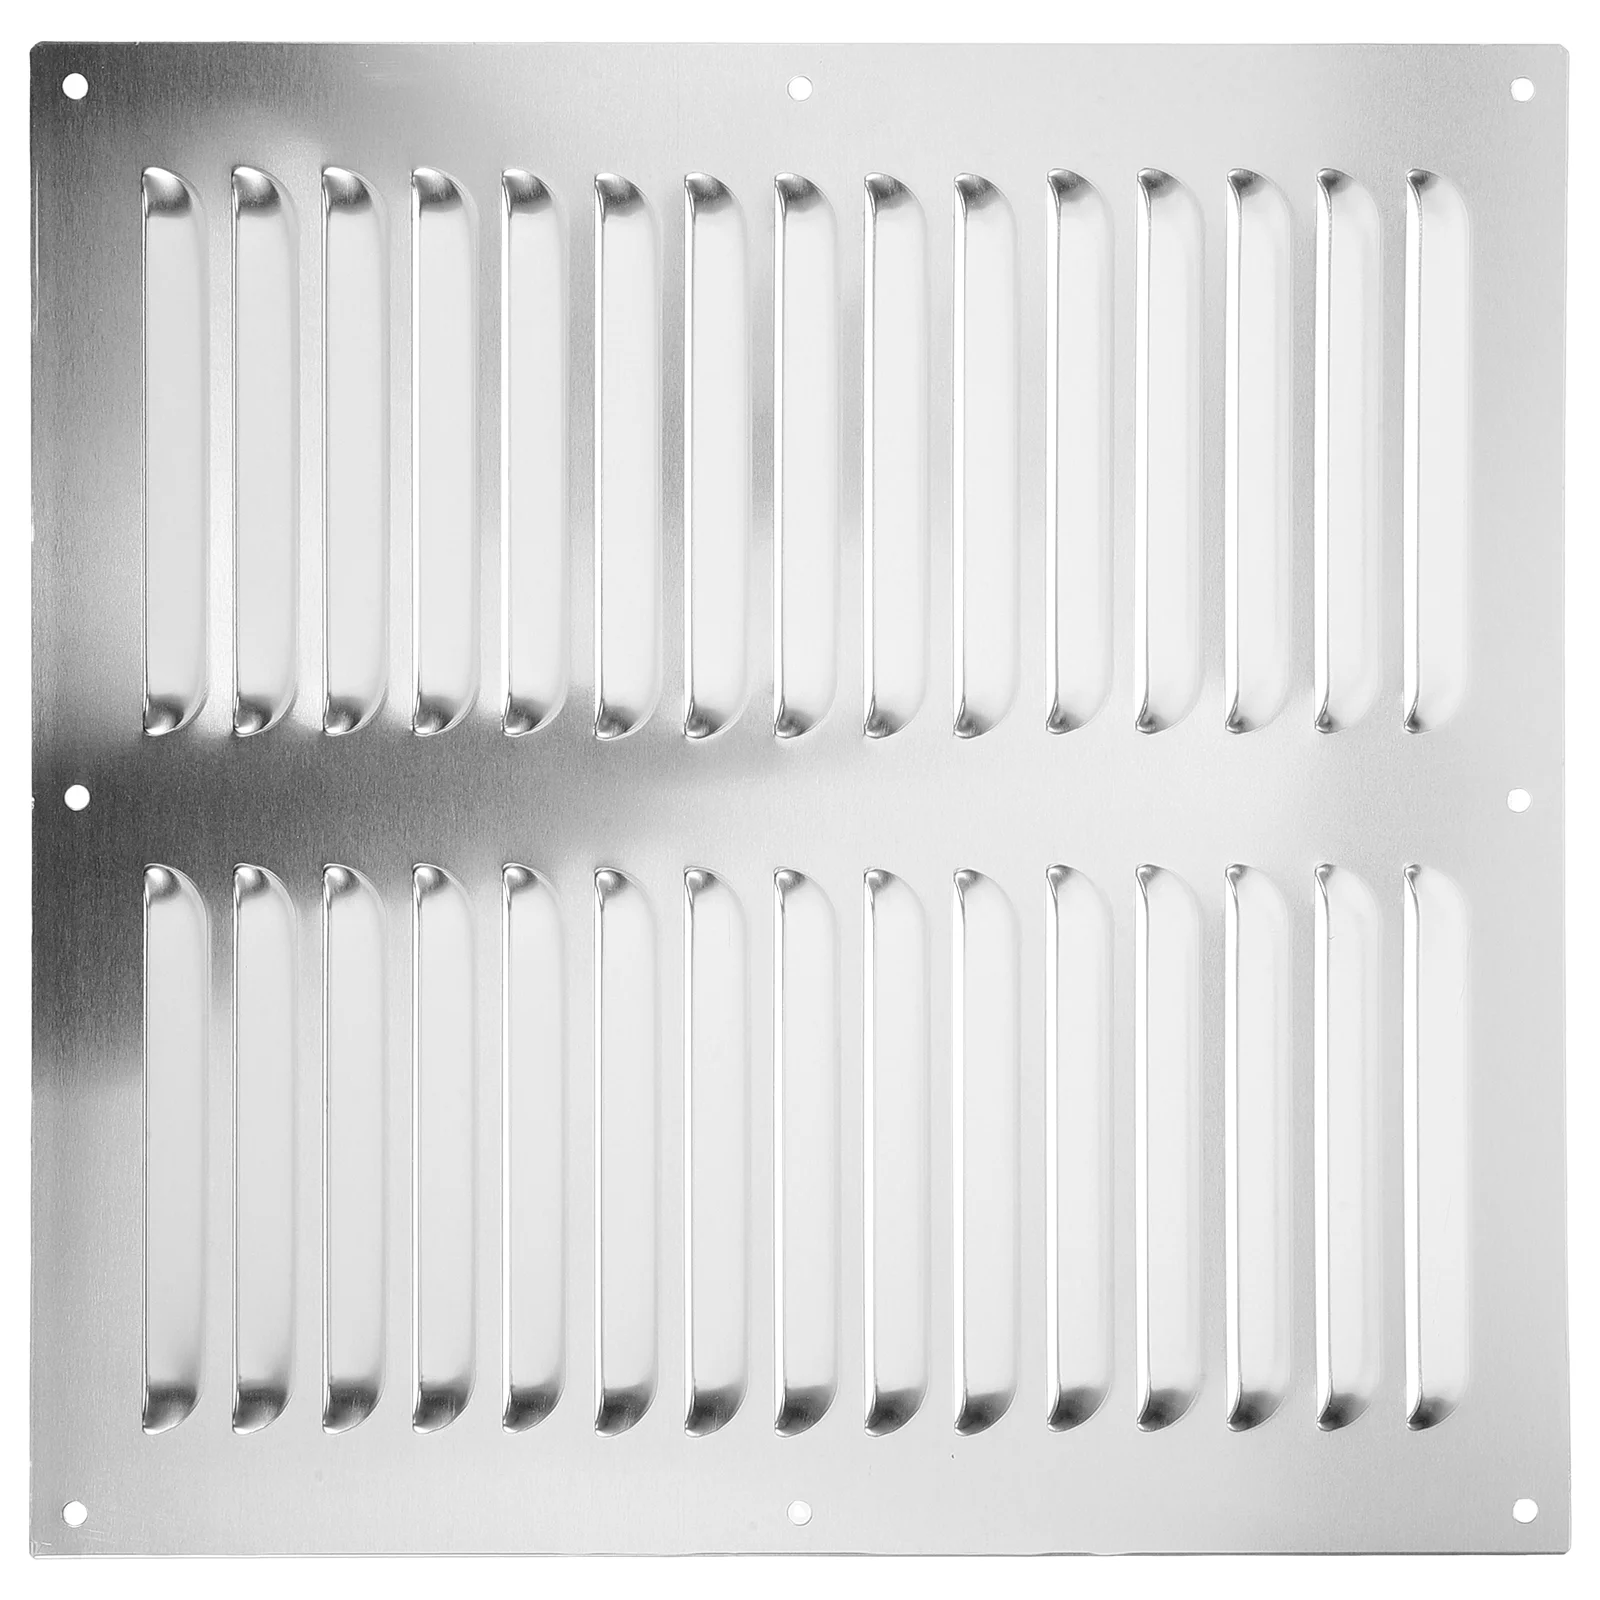 

Air Conditioning Vents Ventilation Grille Cover Wall Internal Exhaust Covers for Home Ceiling Fan